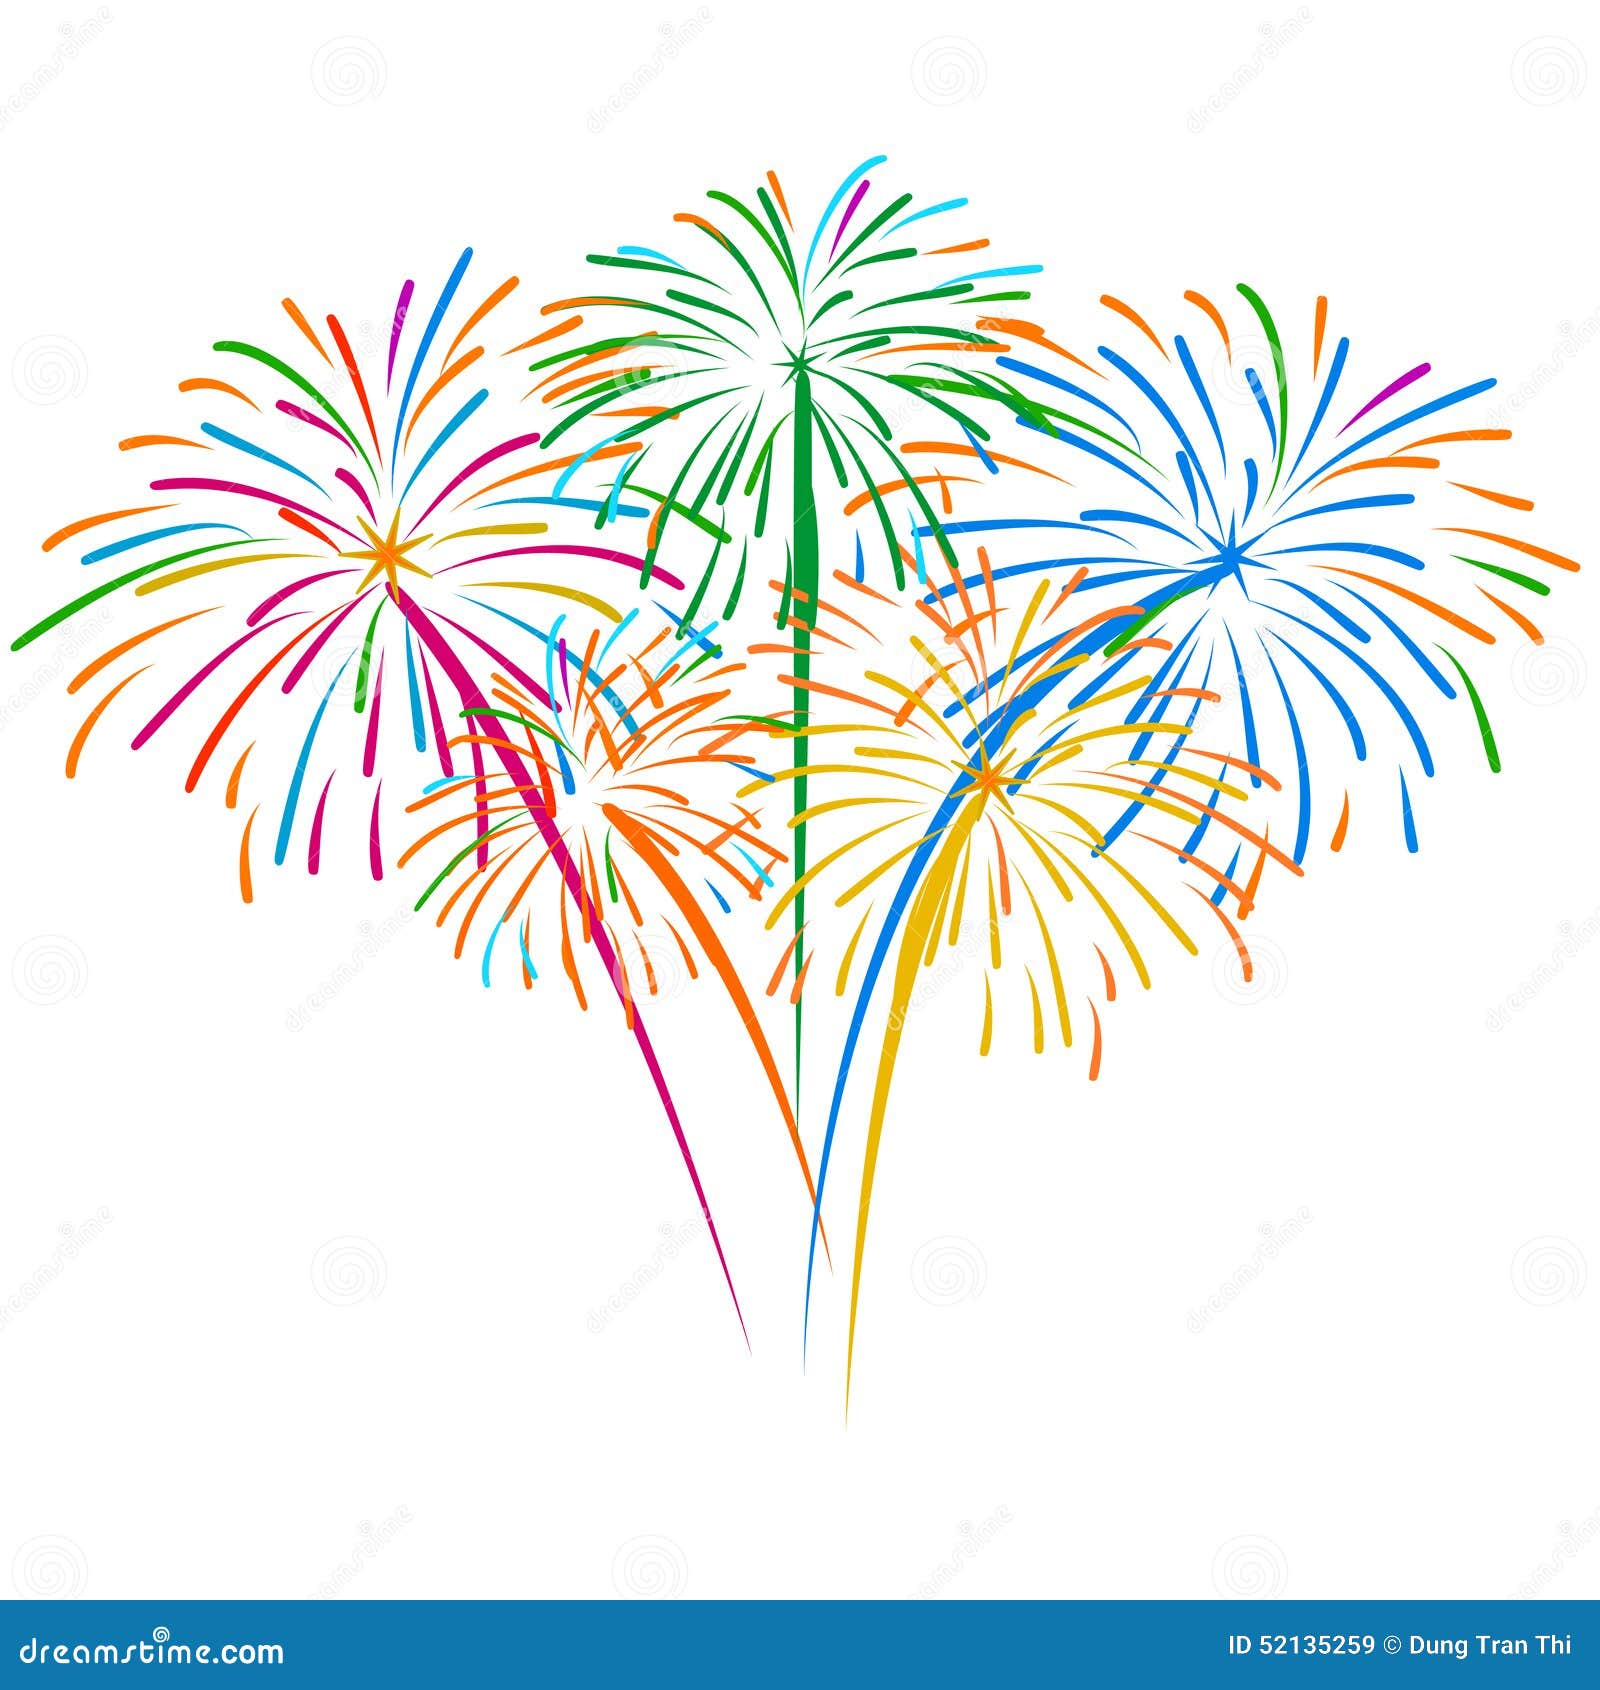 fireworks clipart no background - photo #50